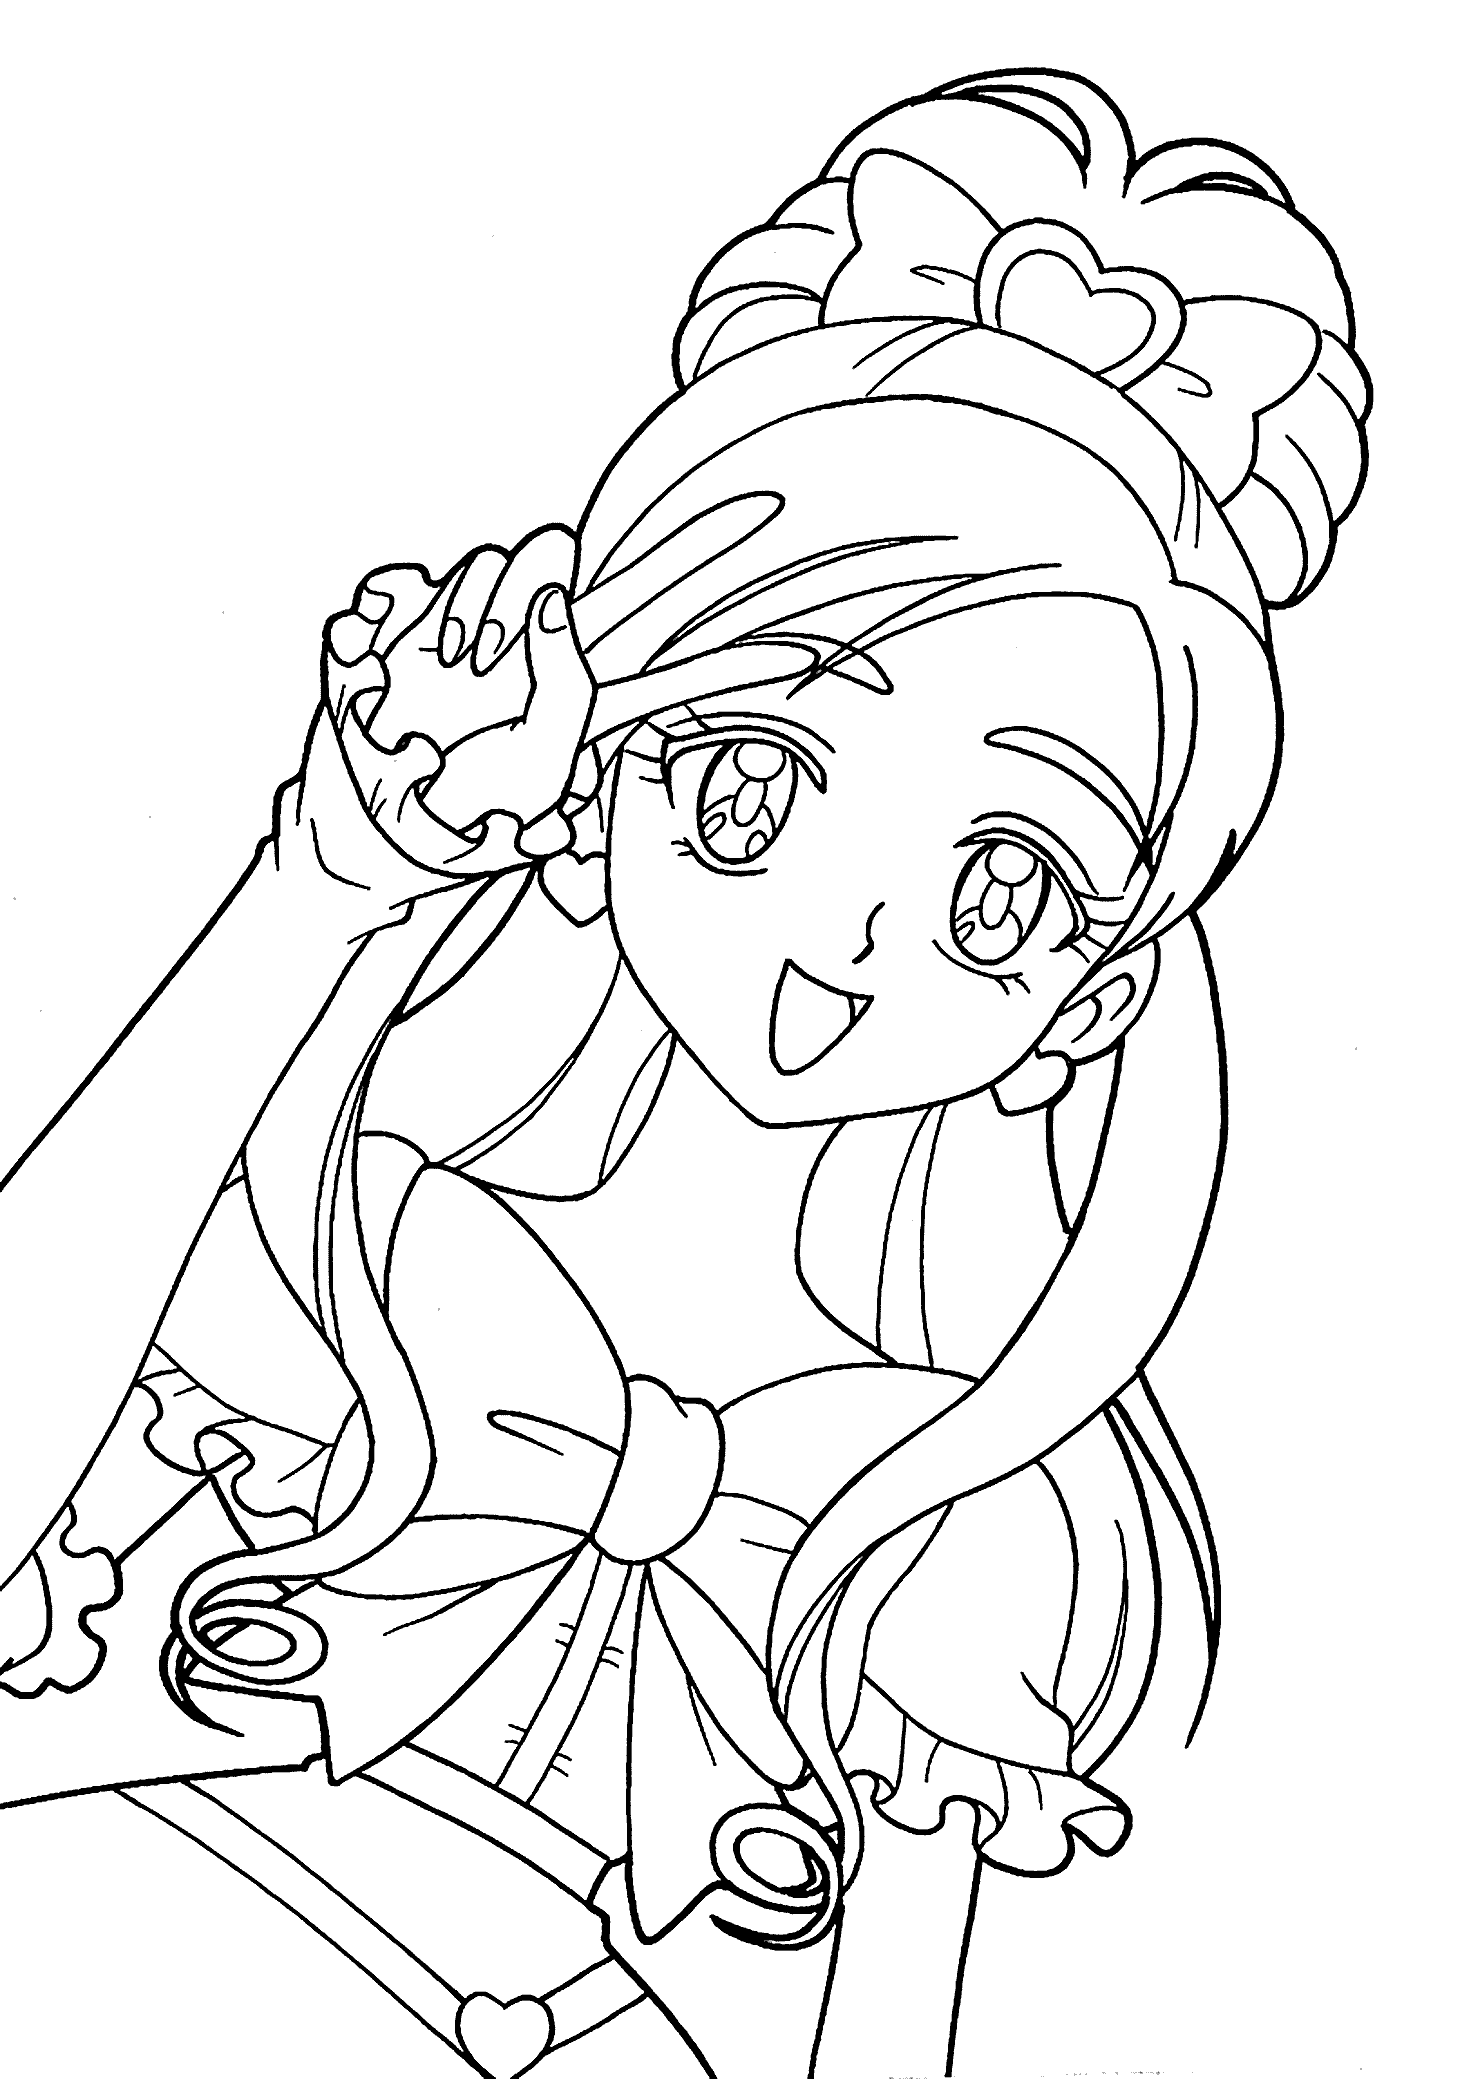 Anime Coloring Pages Coloring Pages Anime Colouring Pages For Kids To Print  Harmony In - entitlementtrap.com | Manga coloring book, Cute coloring  pages, Disney princess coloring pages